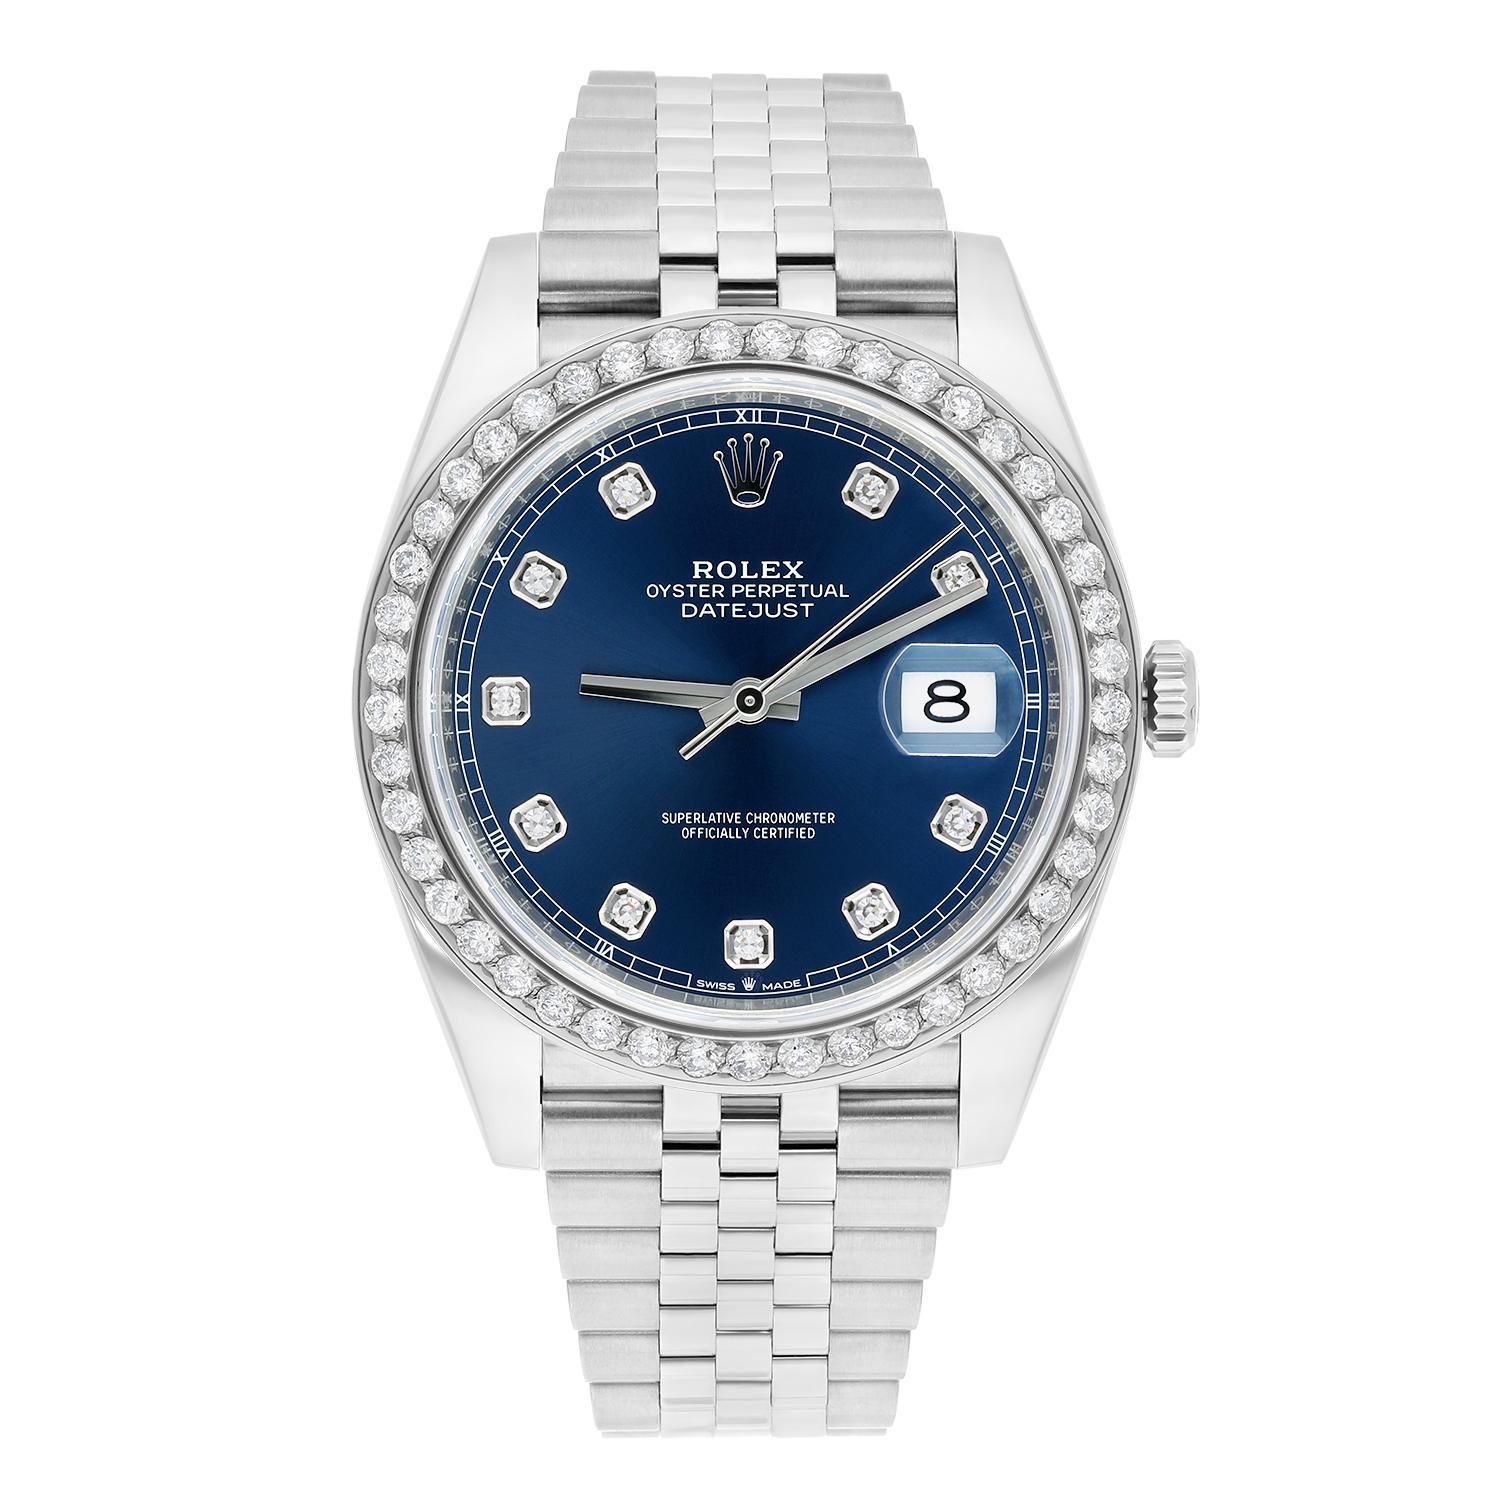 This stunning Rolex Datejust 41 wristwatch is a combination of luxury and elegance. Featuring a blue diamond dial with diamond markers and a custom diamond bezel with 100% natural diamonds, this watch is a true masterpiece. Sale comes with a Rolex